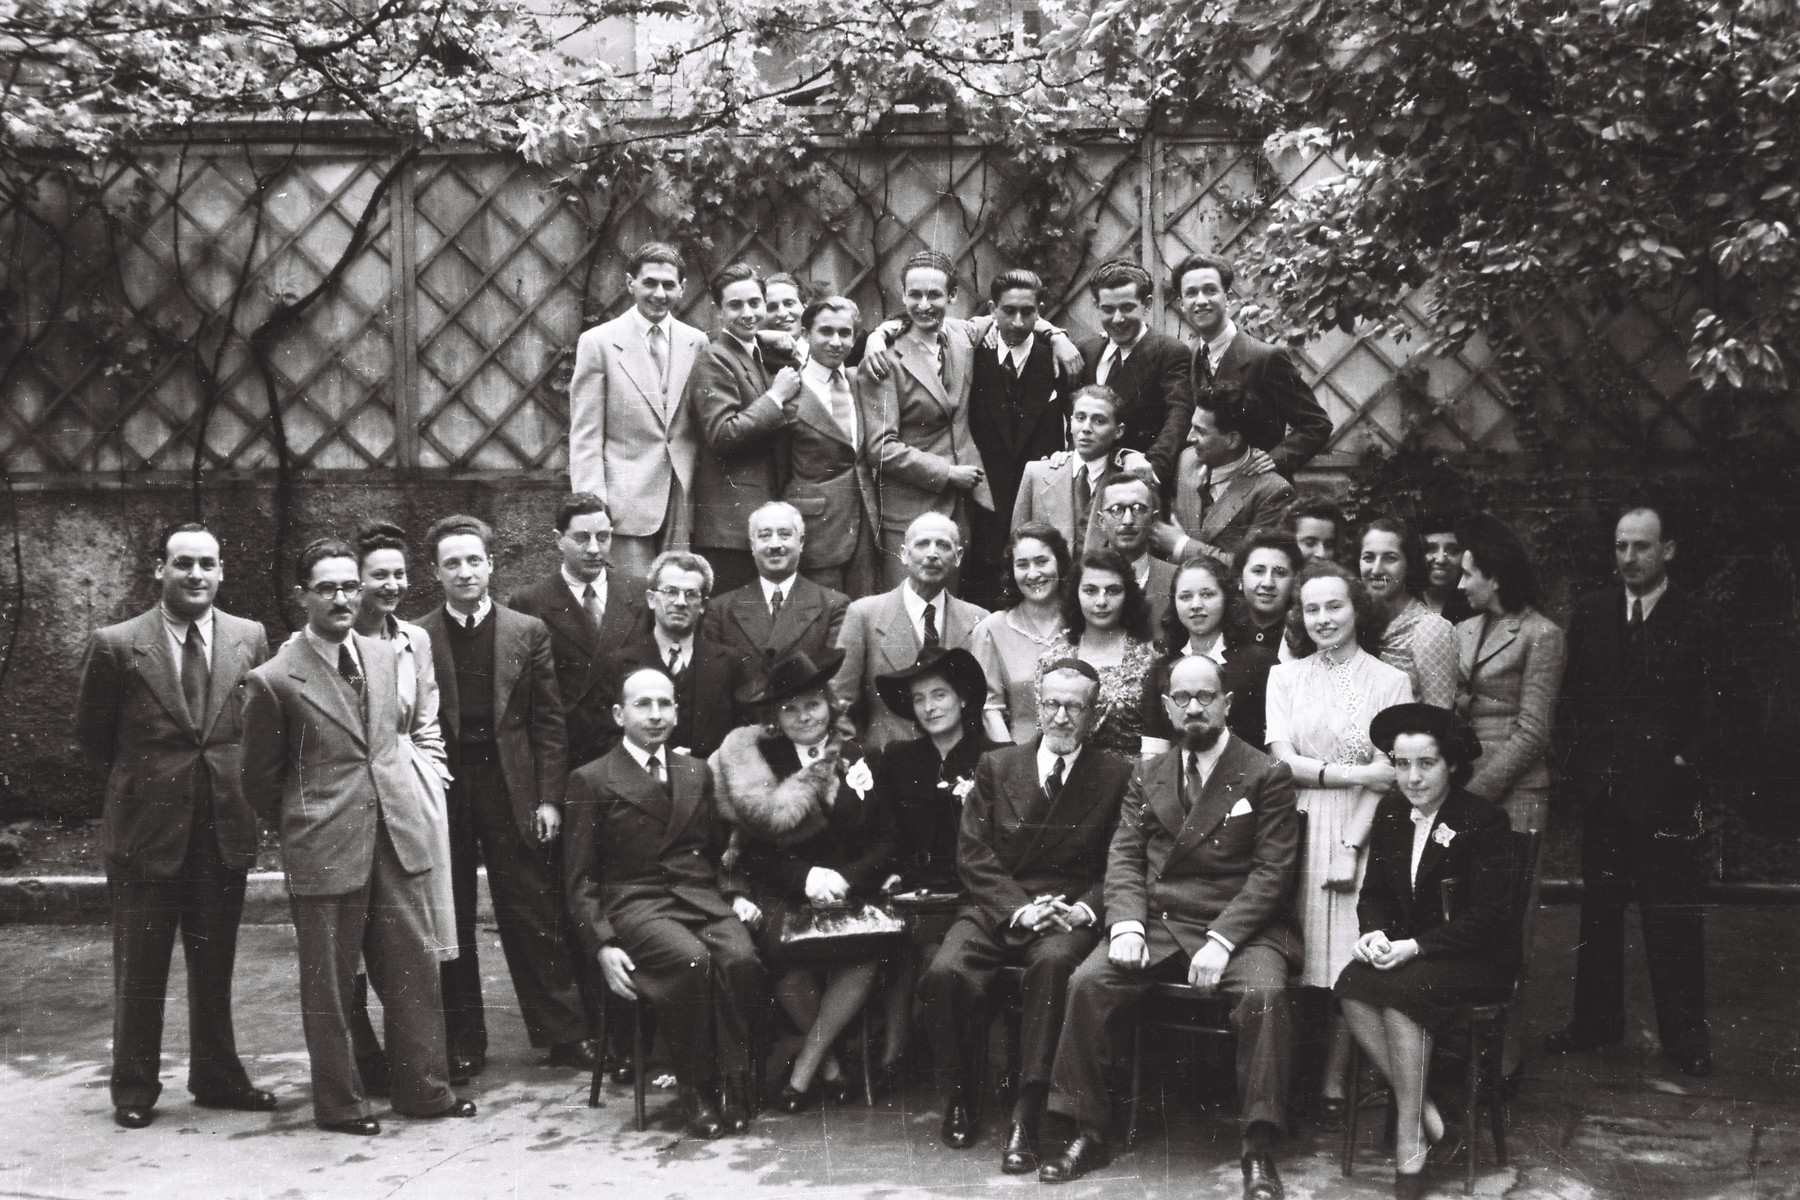 Faculty and students pose for a portrait at the conclusion of the graduation exercises at the Jewish high school in Milan.